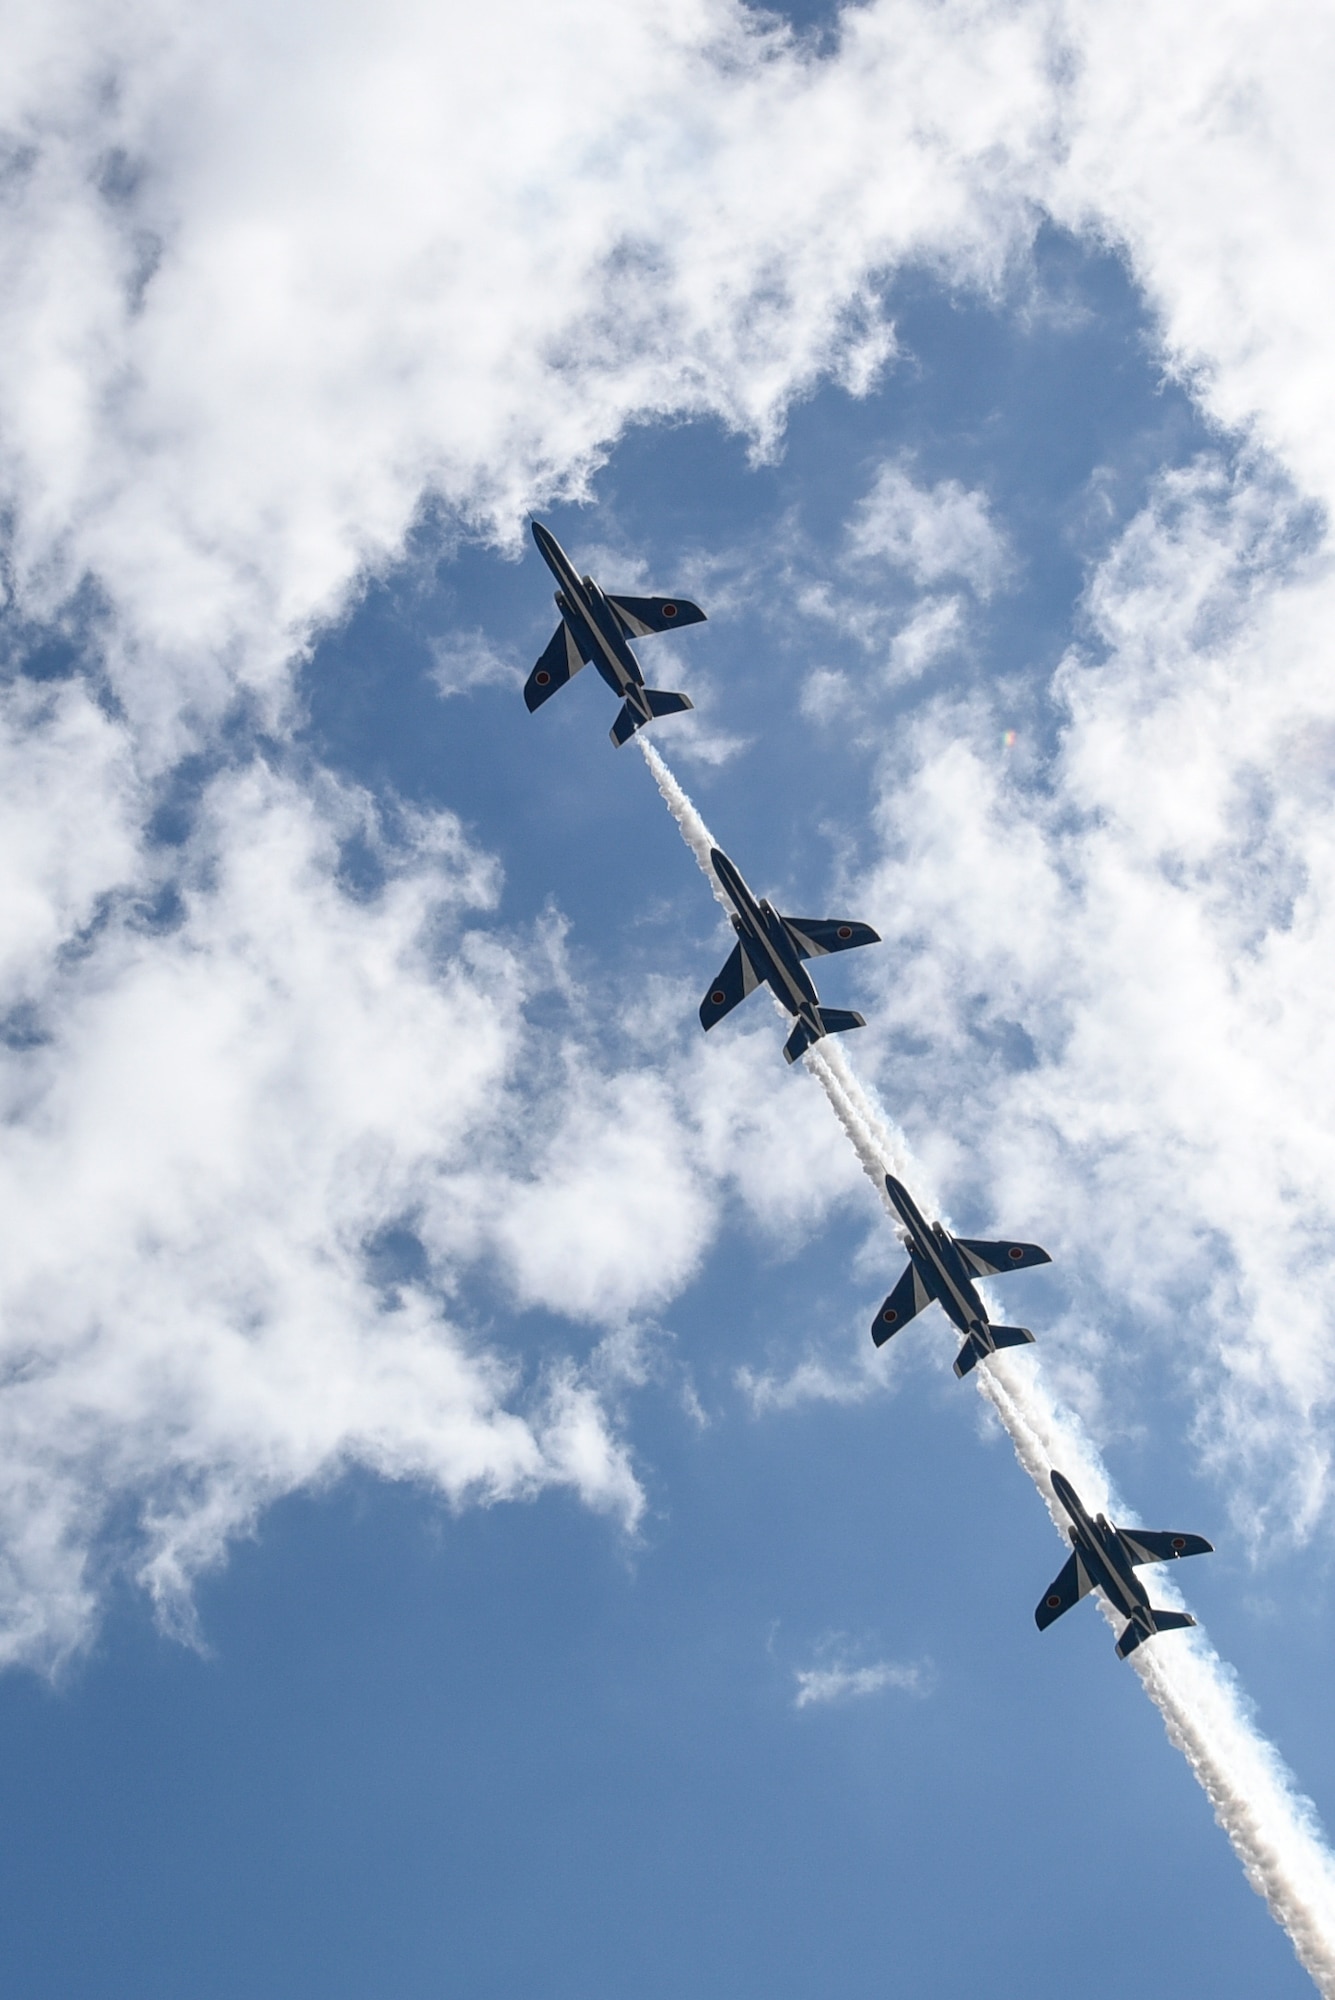 Kawasaki T-4s zoom overhead during an aerobatic demonstration at Misawa Air Base, Japan, Sept. 11, 2016. Blue Impulse, the Japan Air Self-Defense Force aerobatic demonstration team, performed several maneuvers for the air show attendees. The team is assigned with the 4th Air Wing, Matsushima Air Base, Japan. (U.S. Air Force photo by Airman 1st Class Sadie Colbert)
